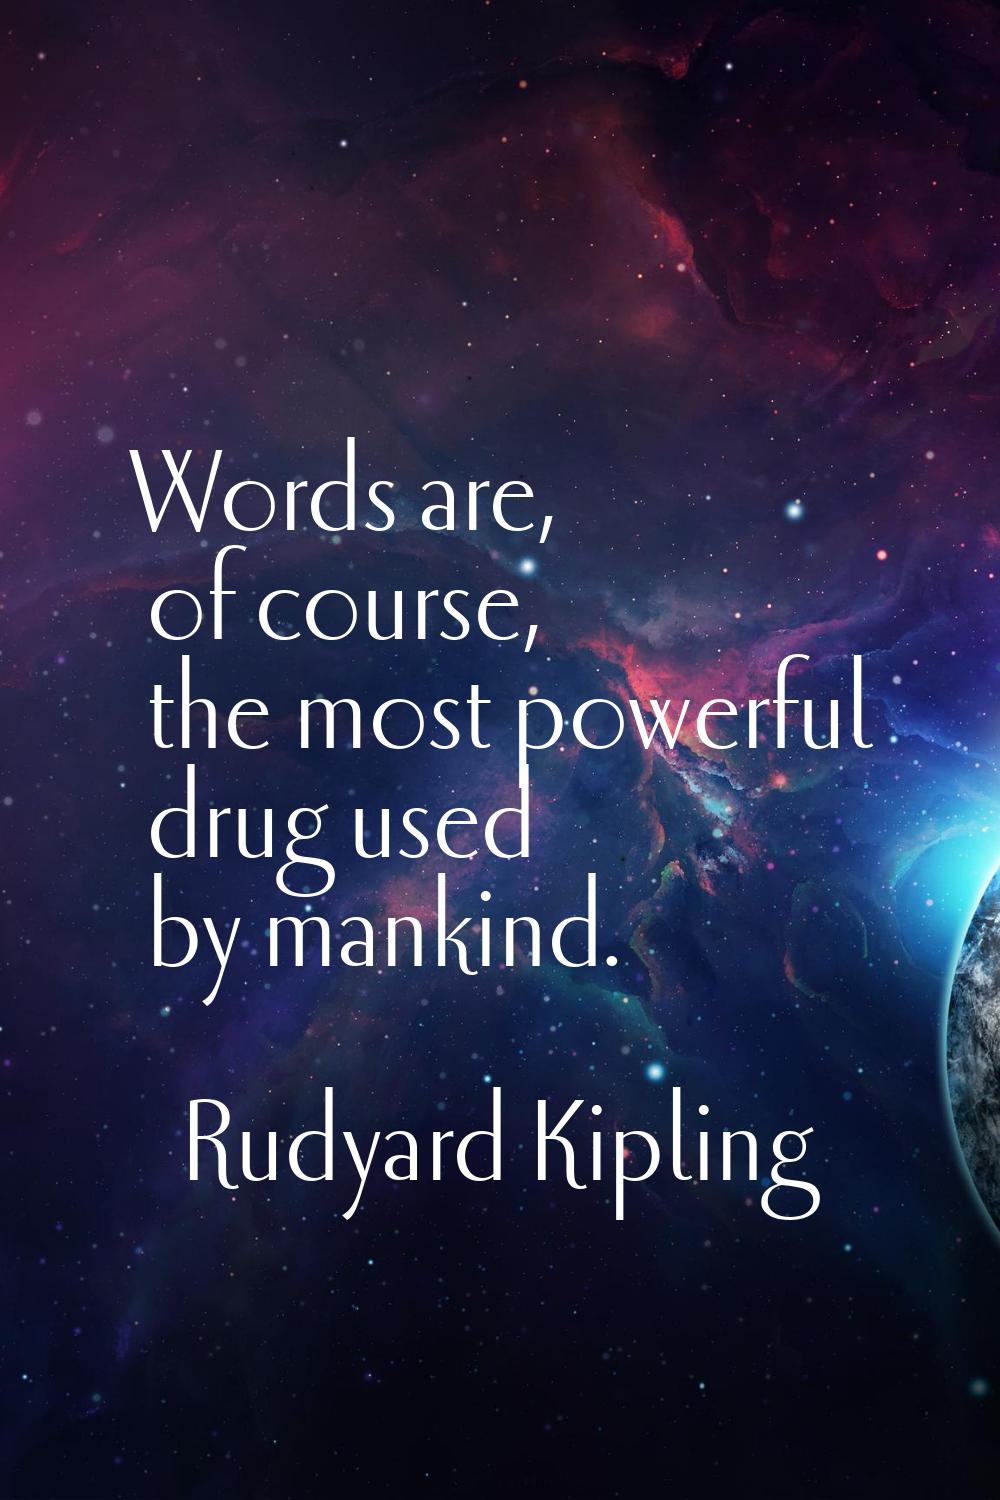 Words are, of course, the most powerful drug used by mankind.